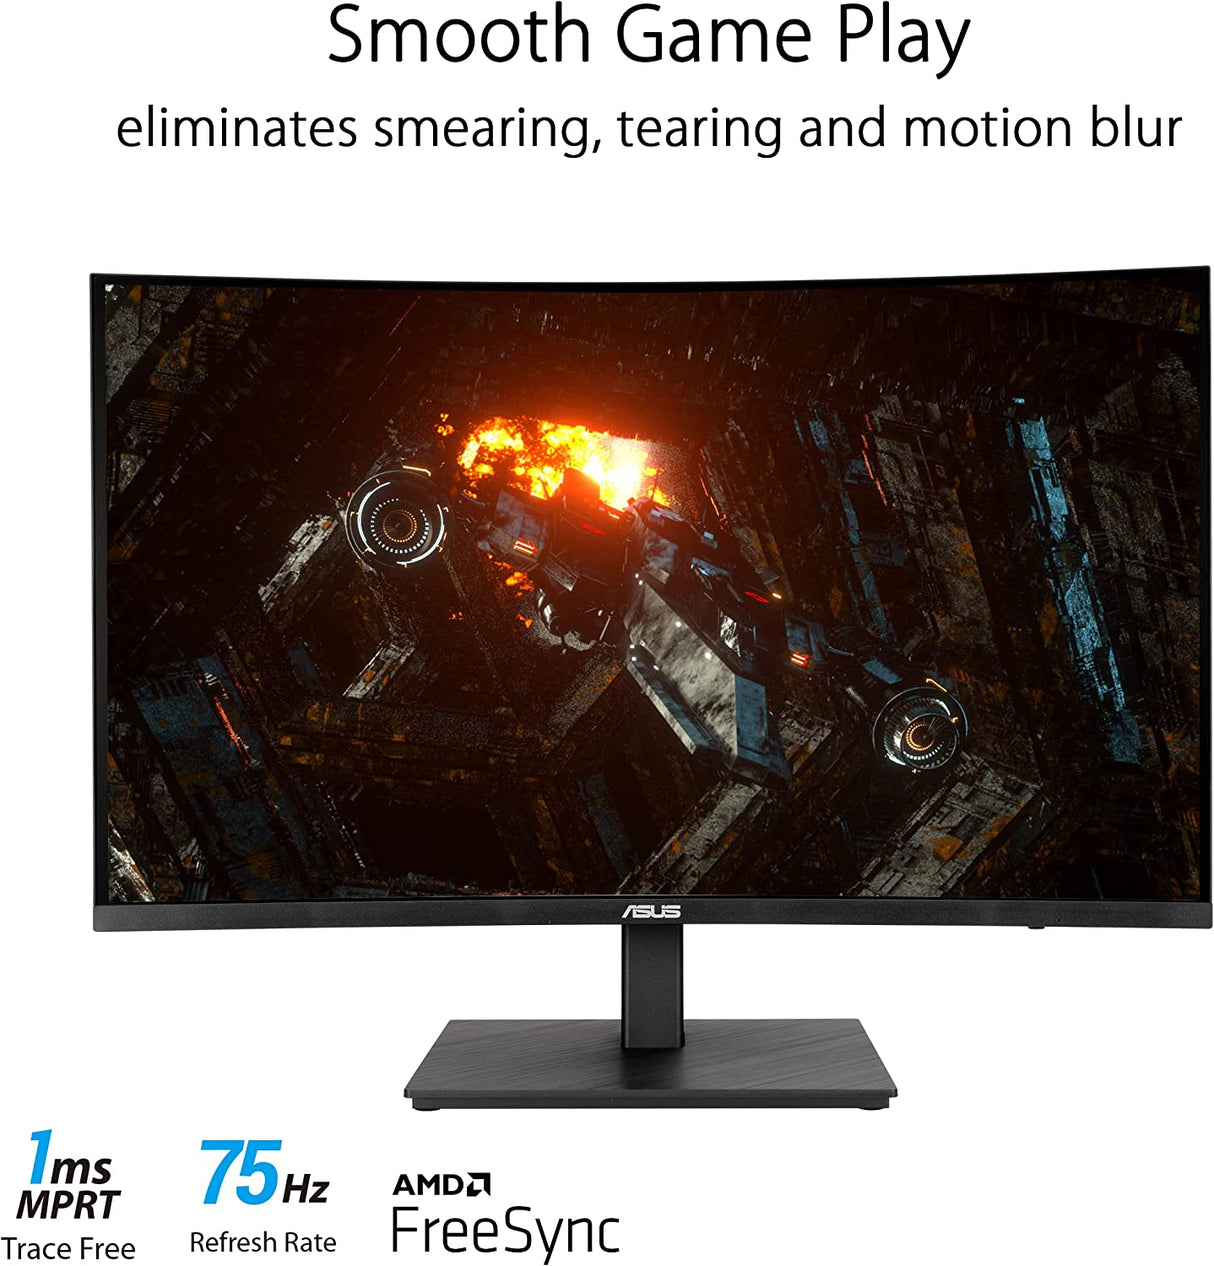 ASUS 27” 1080P Monitor (VA27DCP) - Full HD, IPS, 75Hz, USB-C 65W Power  Delivery, Speakers, Adaptive-Sync/FreeSync, Eye Care, Low Blue Light,  Flicker